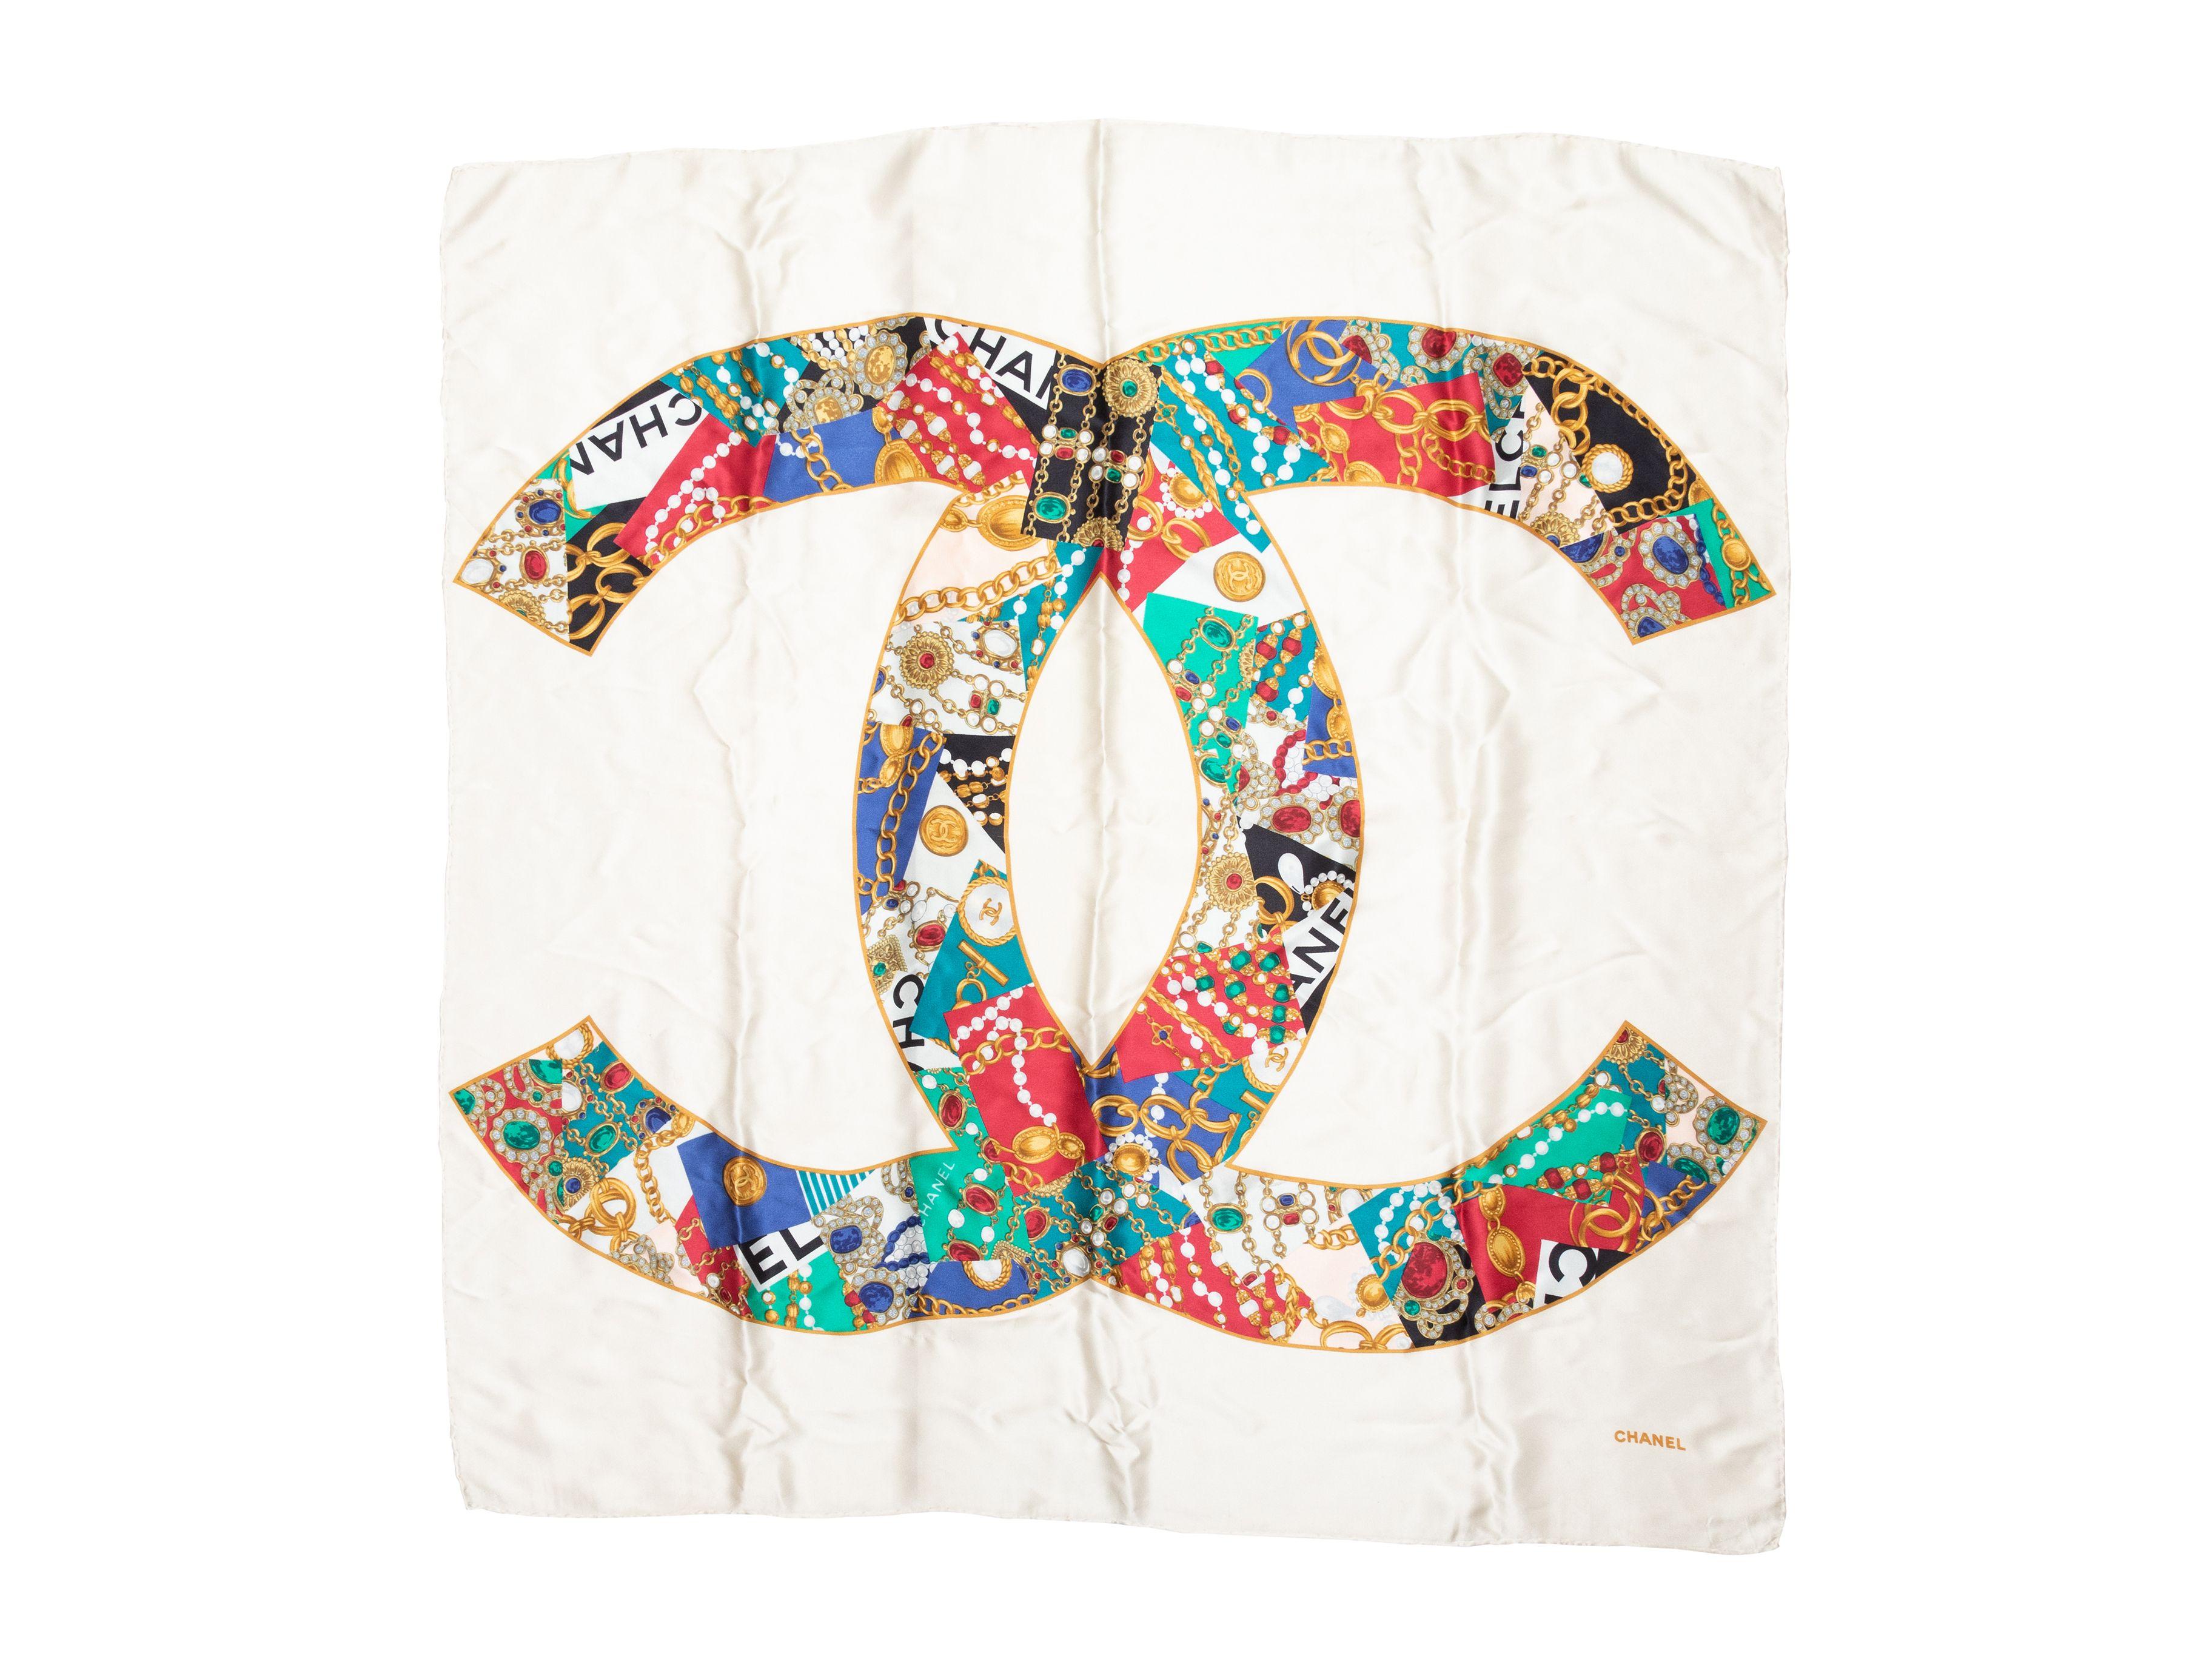 Product Details: White and multicolor CC logo print silk scarf by Chanel. 34